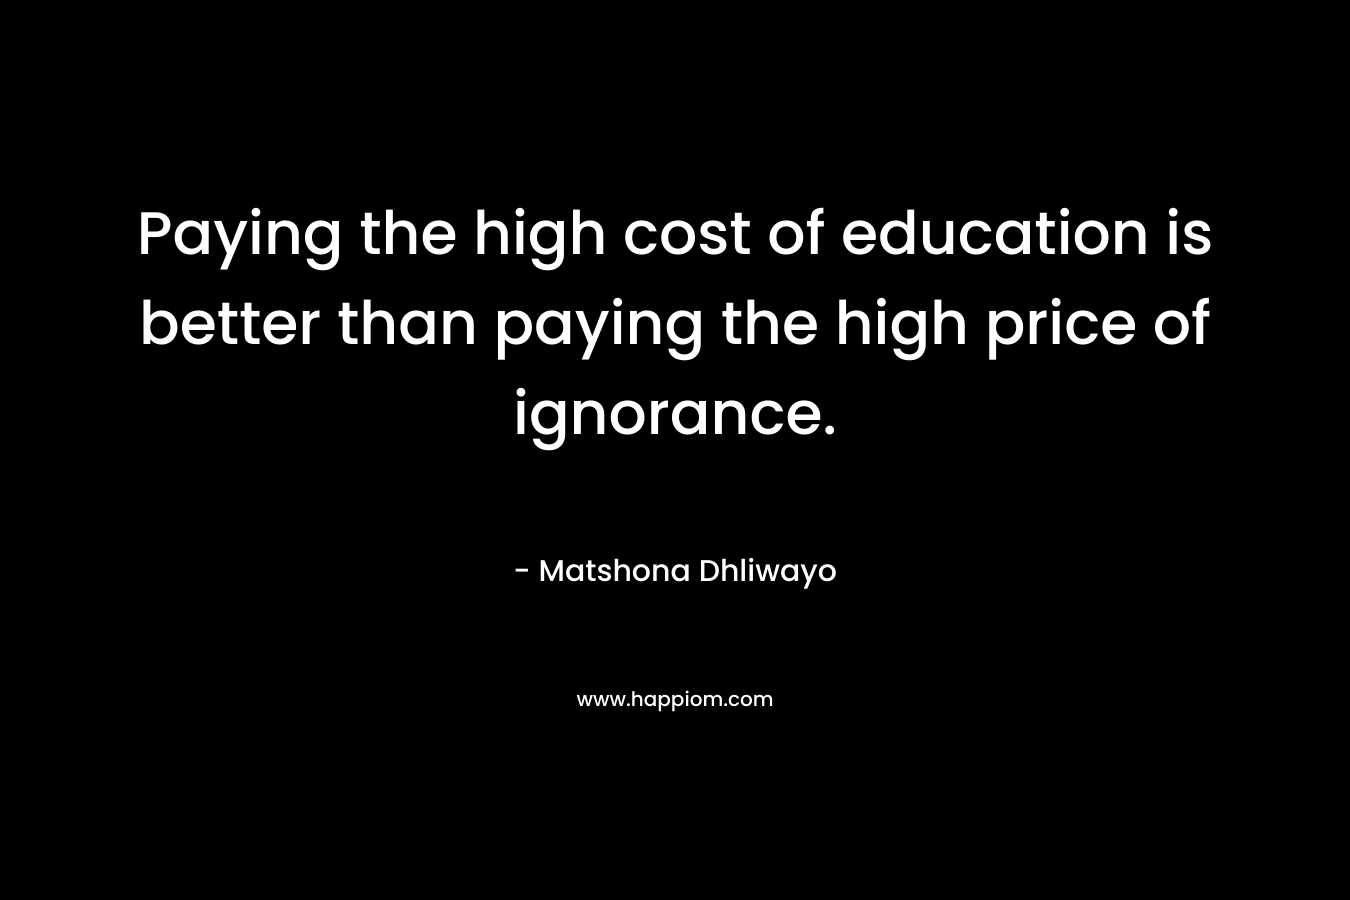 Paying the high cost of education is better than paying the high price of ignorance.